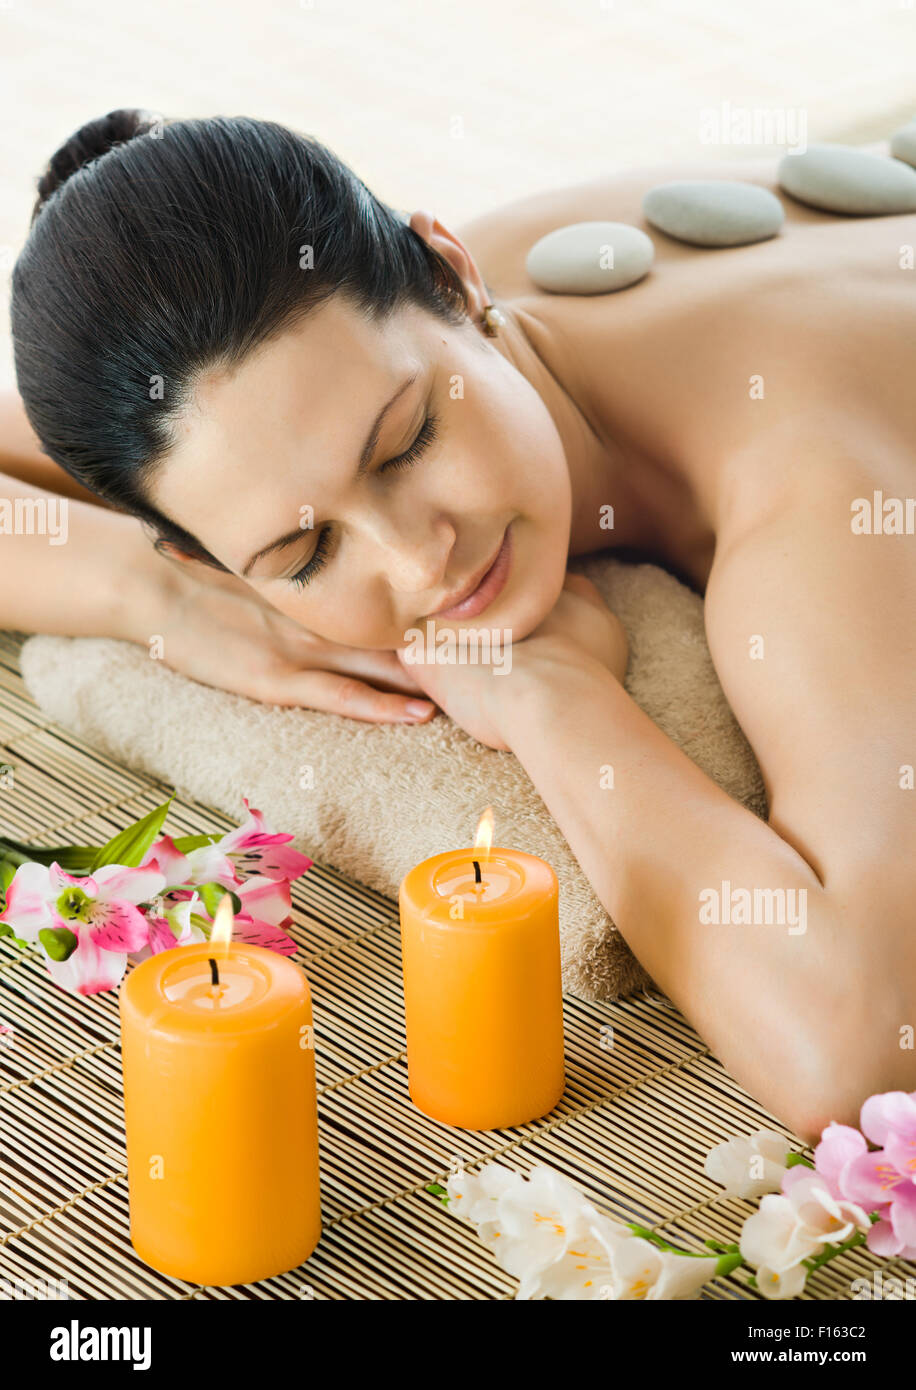 the very  pretty  young woman on spa treatment , vertical portrait Stock Photo